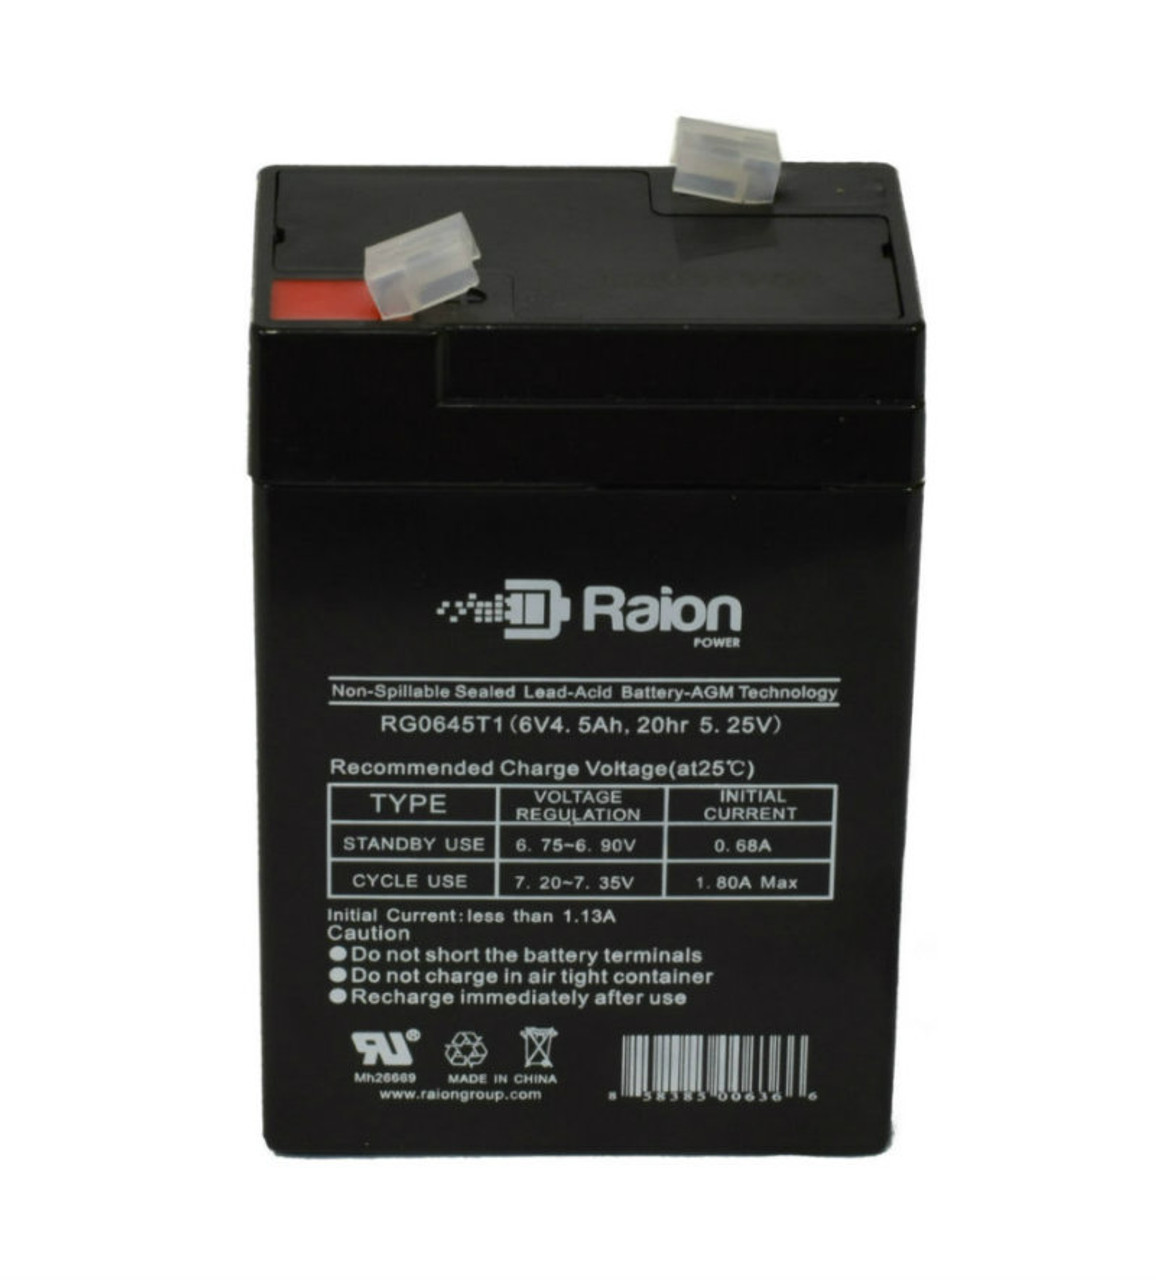 Raion Power RG0645T1 Replacement Battery Cartridge for Welch Allyn Spot 4200-84 Vital Sign Monitor